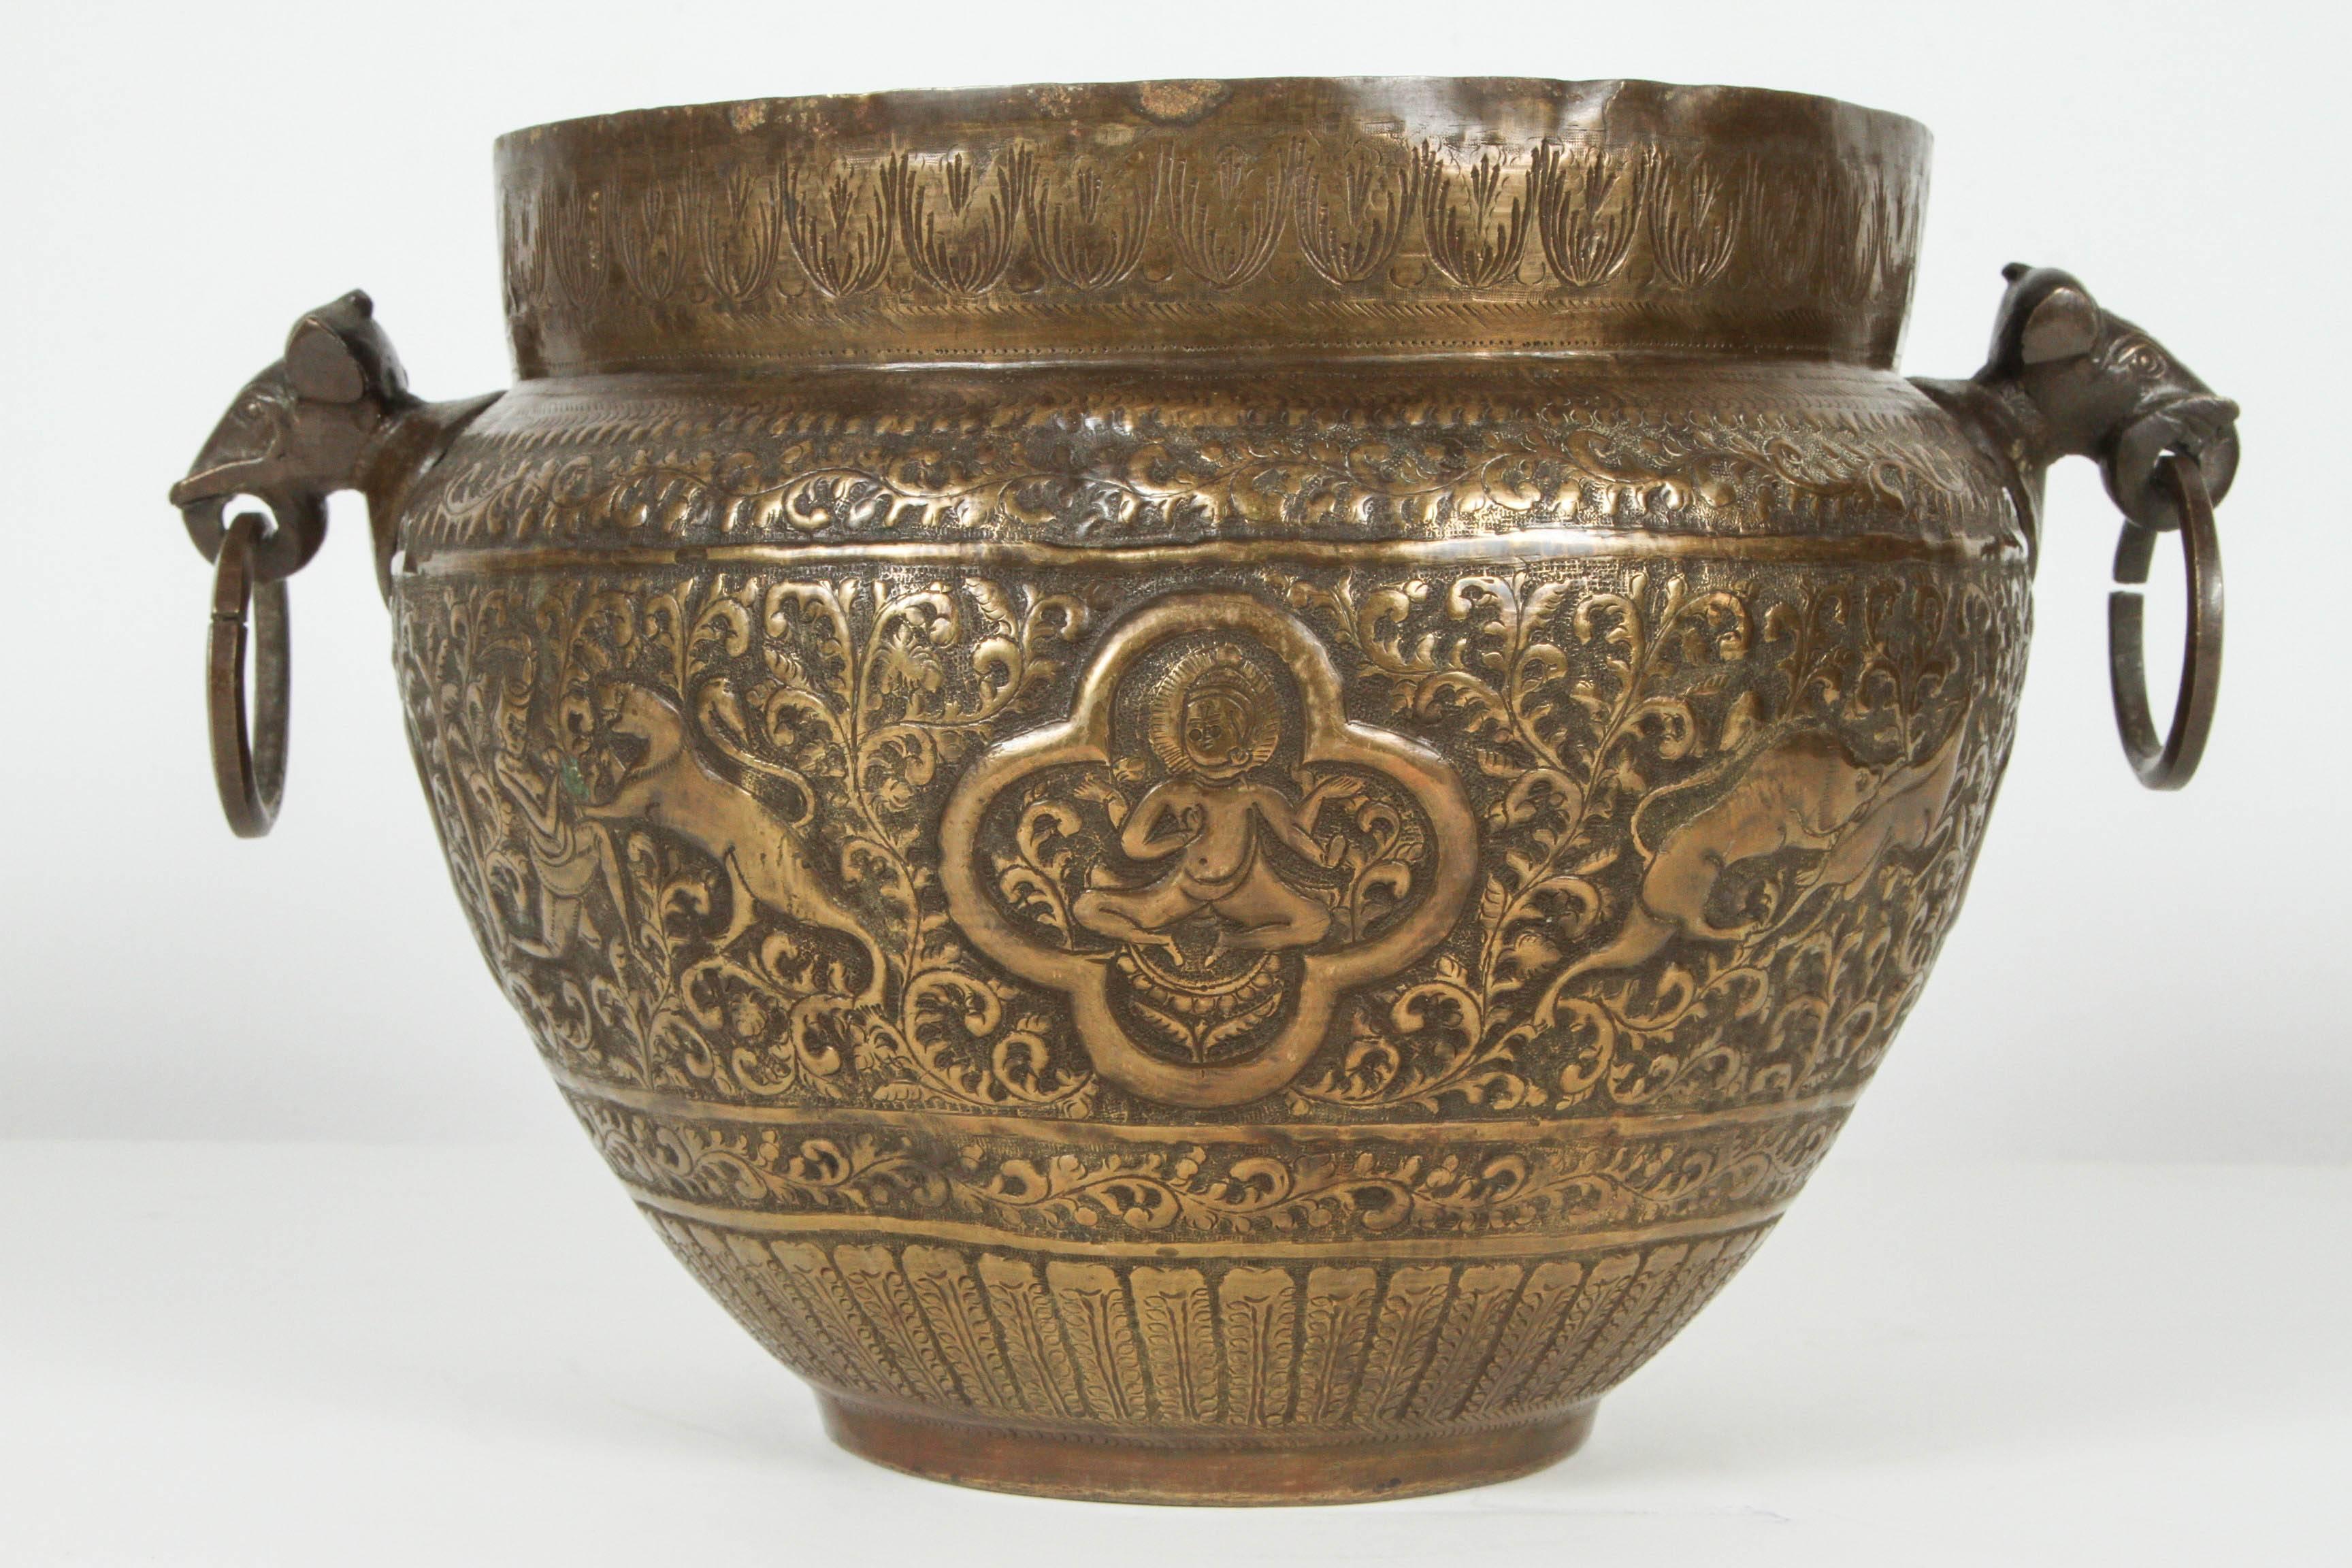 19th century bronze Anglo Indian Mughal style bronzed cache pot.
Great patina on hand-crafted and embossed brass with floral Moorish designs, and hunting scenes with lions and deer.
Some medallion figuring Buddha .
The 2 handles figures are